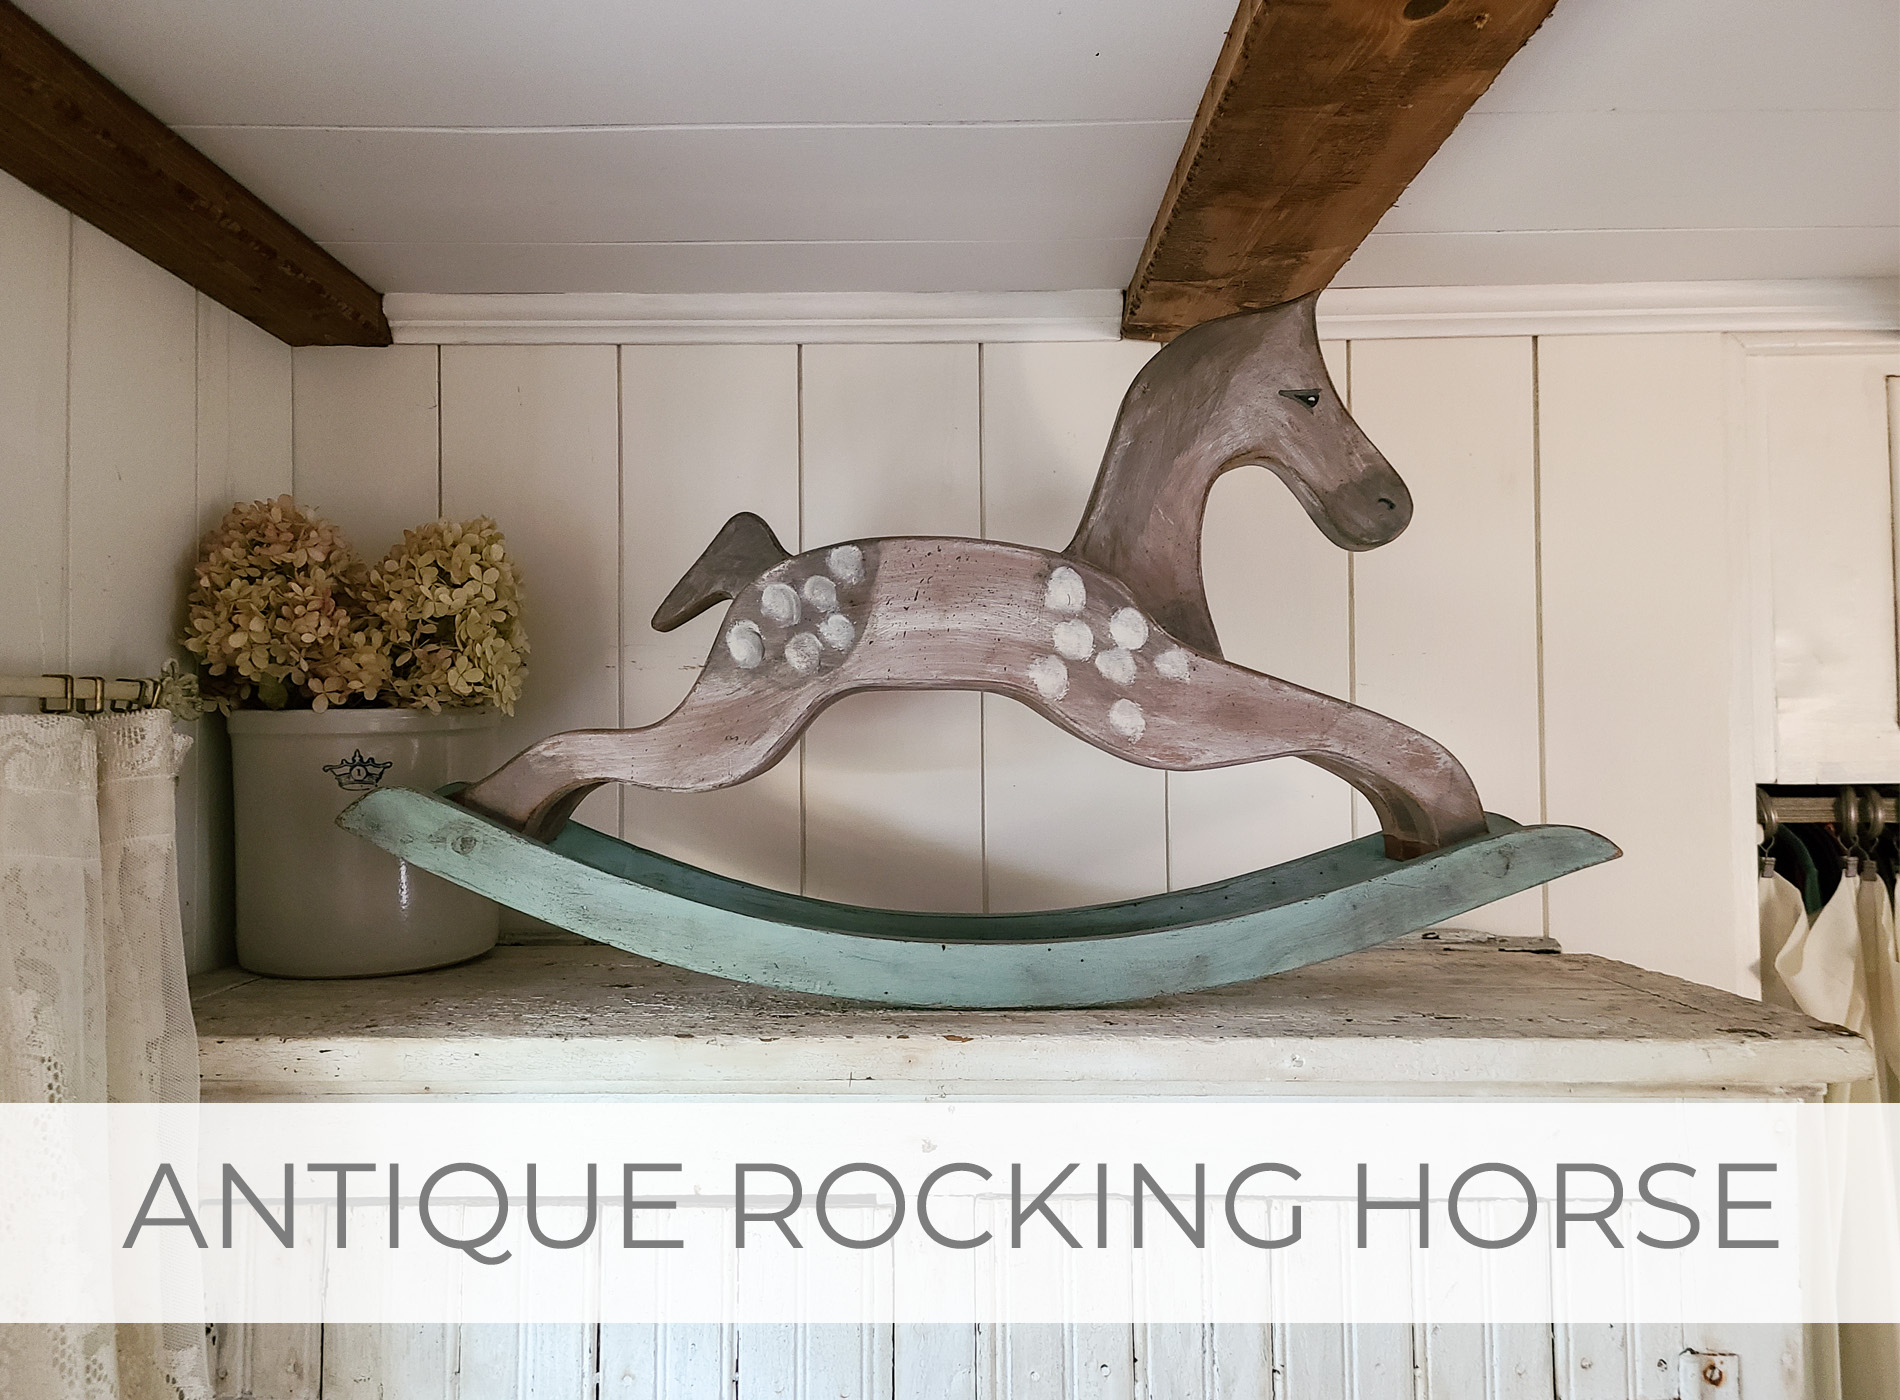 Handmade Antique Rocking Horse from Reclaimed Parts by Larissa of Prodigal Pieces | prodigalpieces.com #prodigalpieces